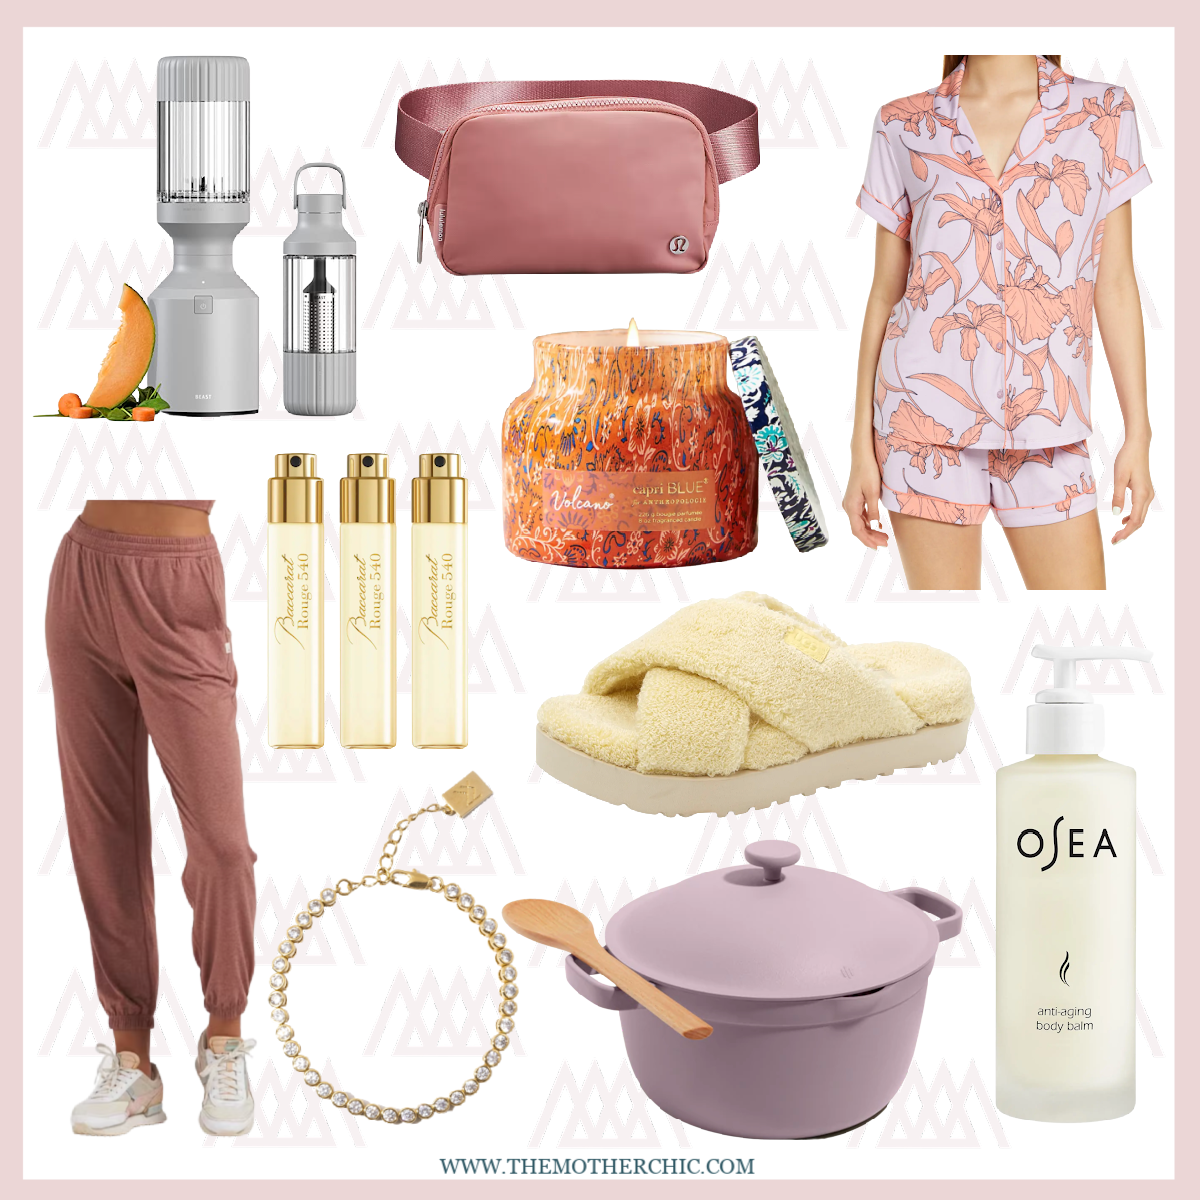 Mother's Day Gift Guide · ERICA BALL STYLE